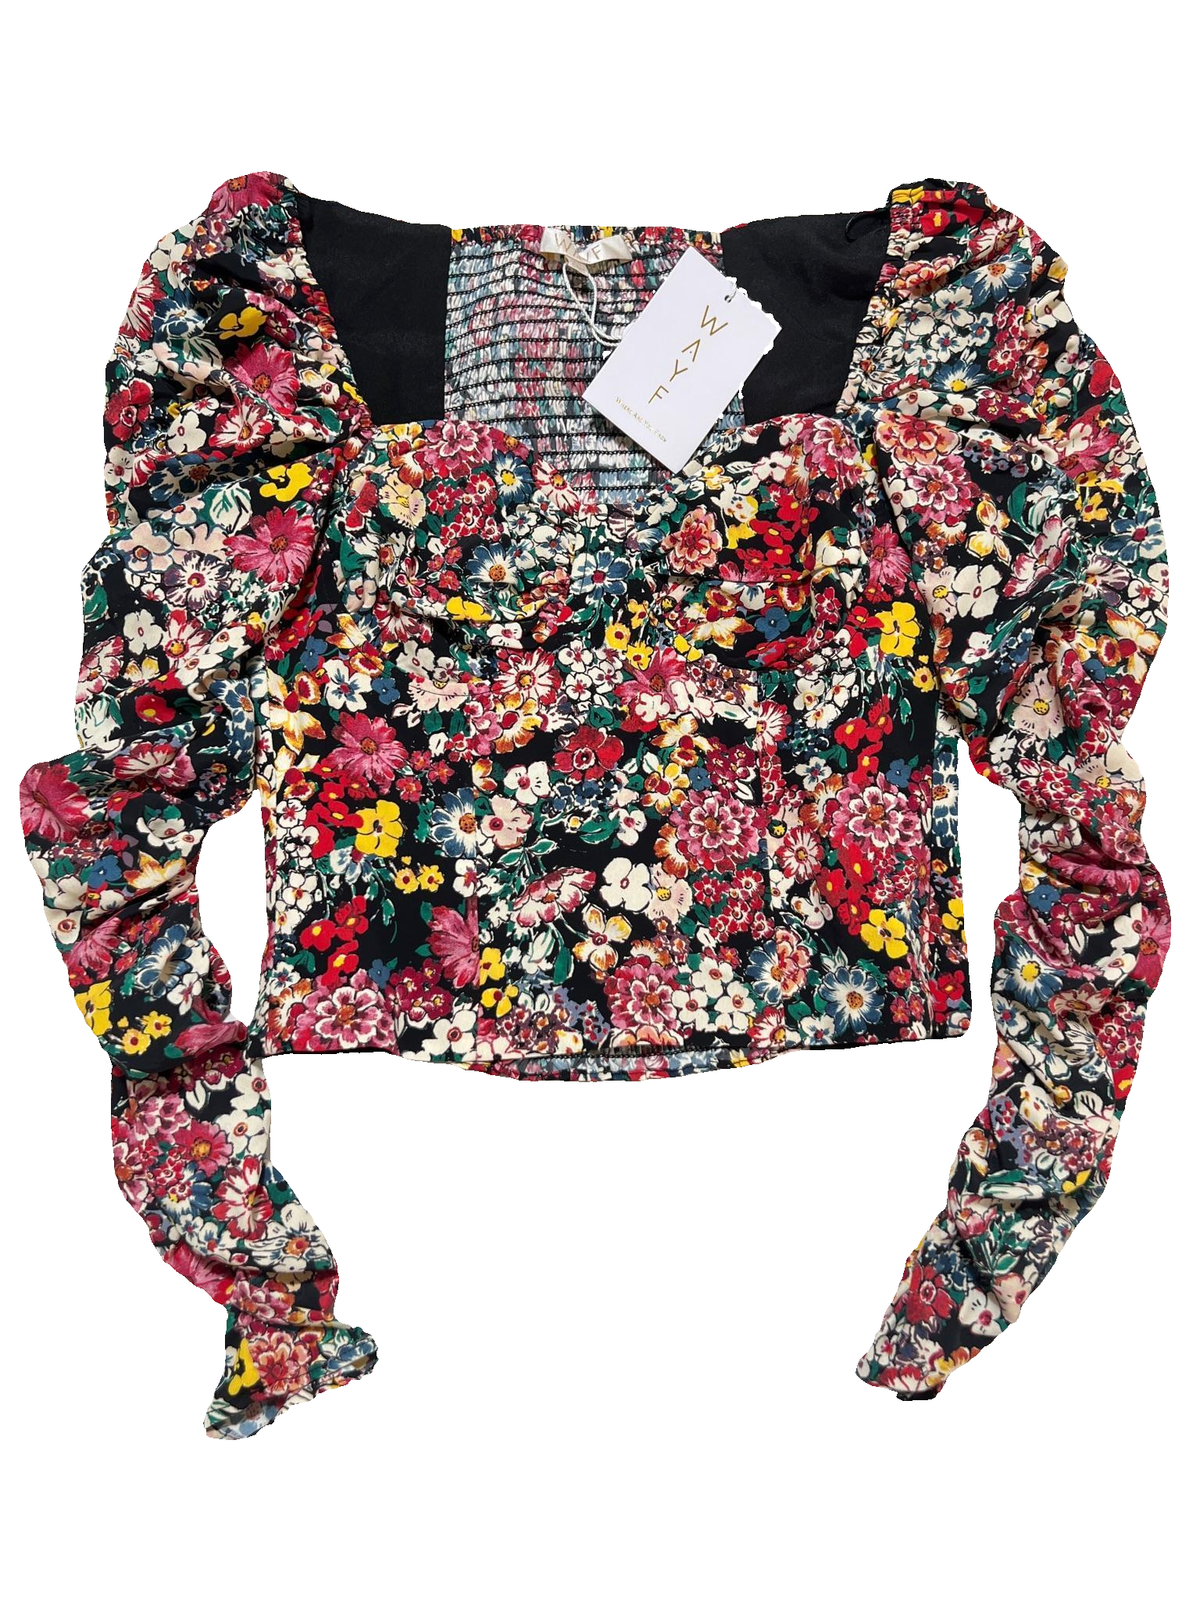 Wayf- Floral Print Long Sleeve Top NEW WITH TAGS